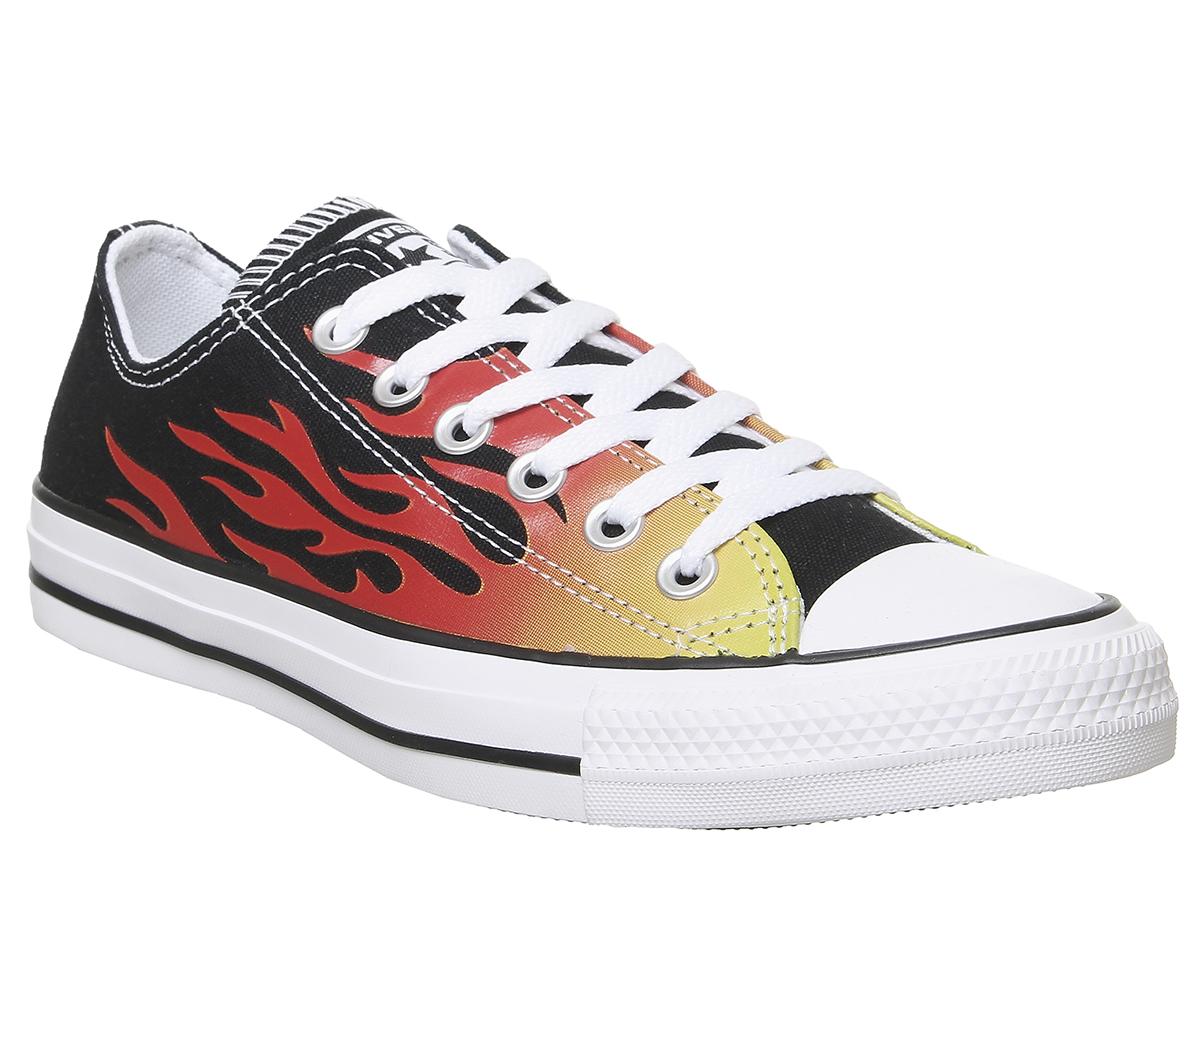 ConverseConverse All Star Low TrainersBlack Enamel Red Fresh Yellow Flame